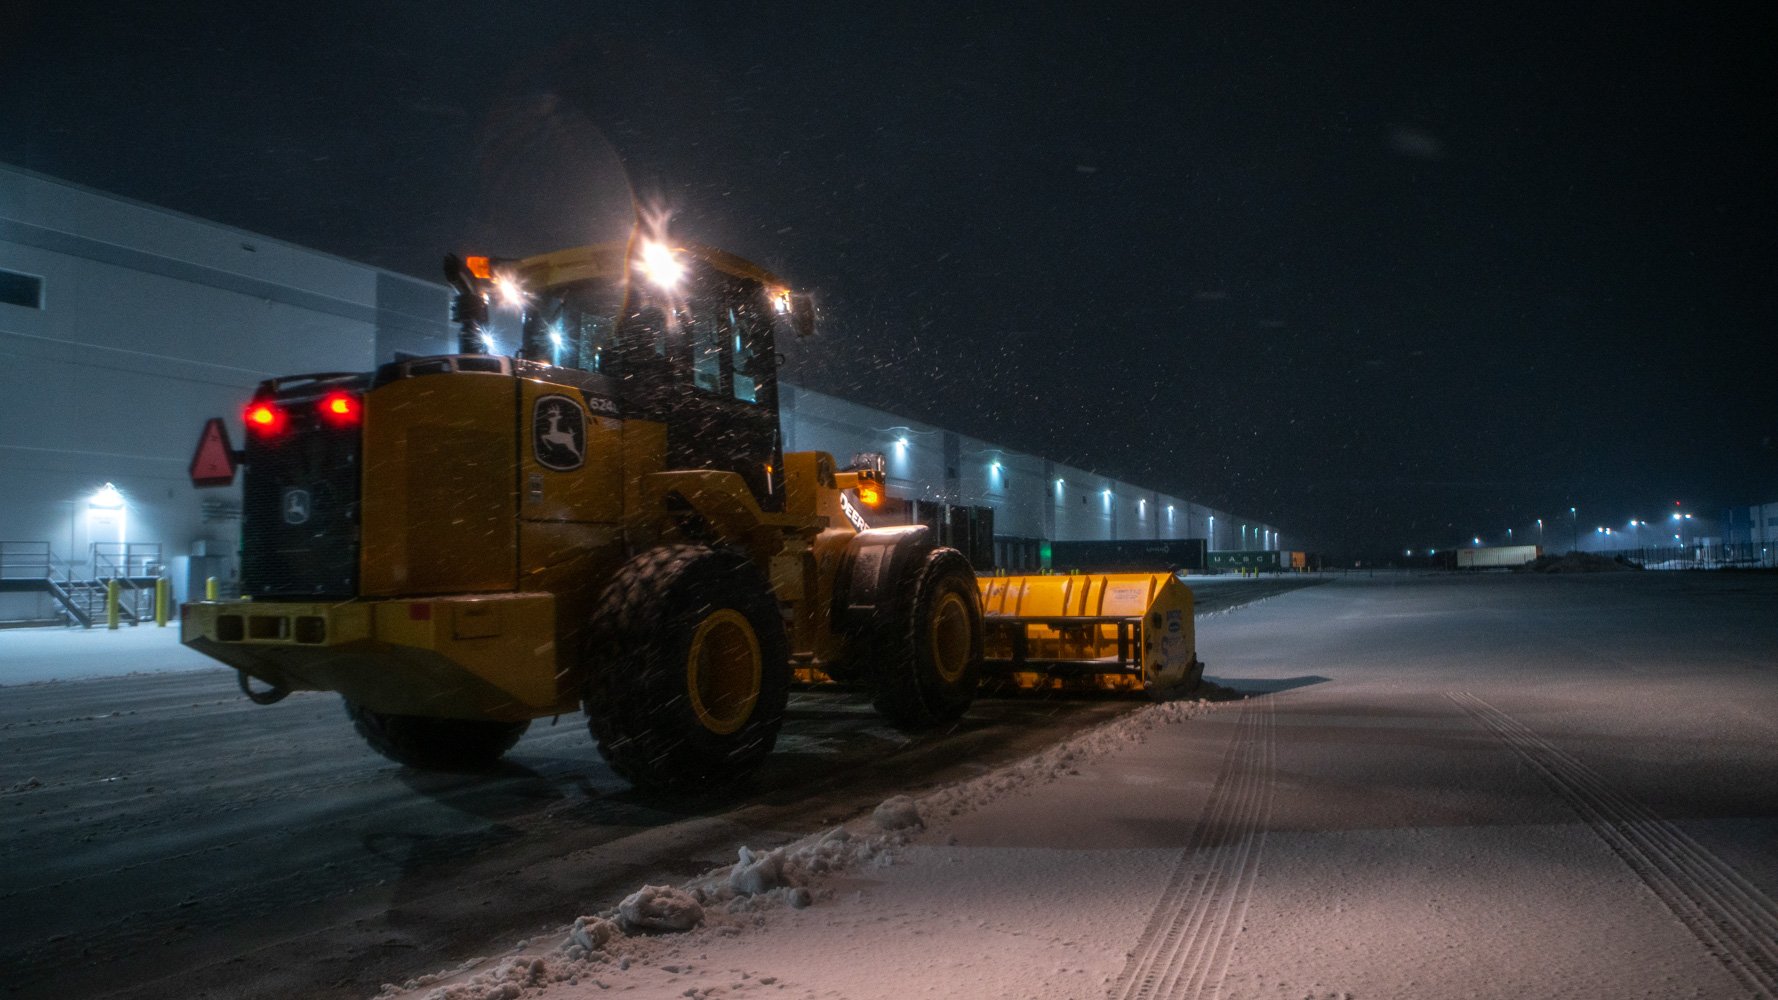 commercial snow loader plowing a warehouse parking lot at night